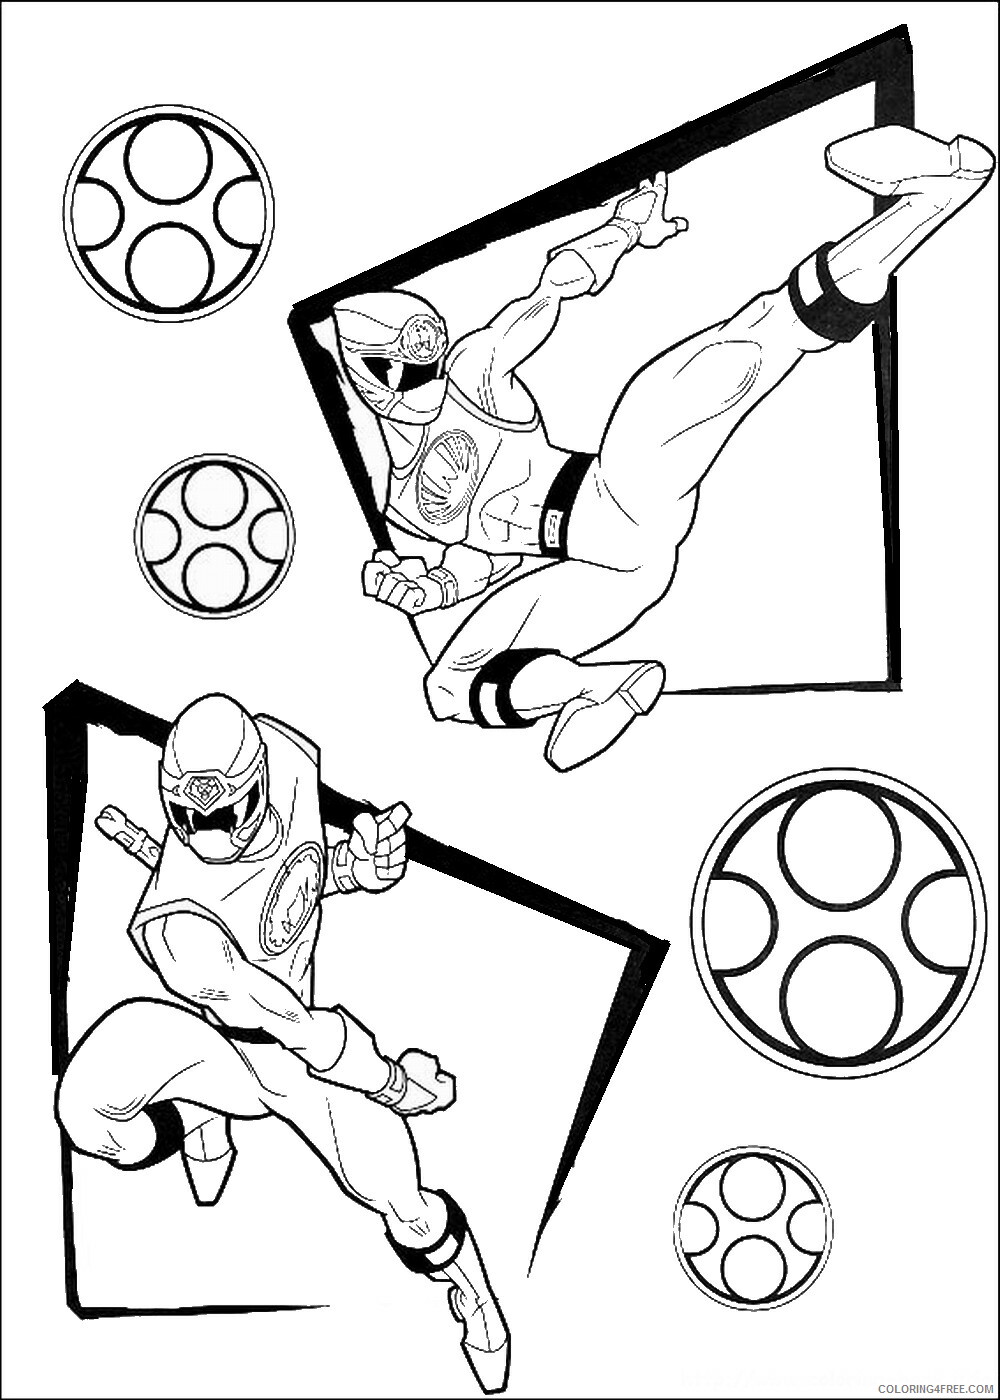 Power Rangers Coloring Pages TV Film power_ranger_83 Printable 2020 06695 Coloring4free